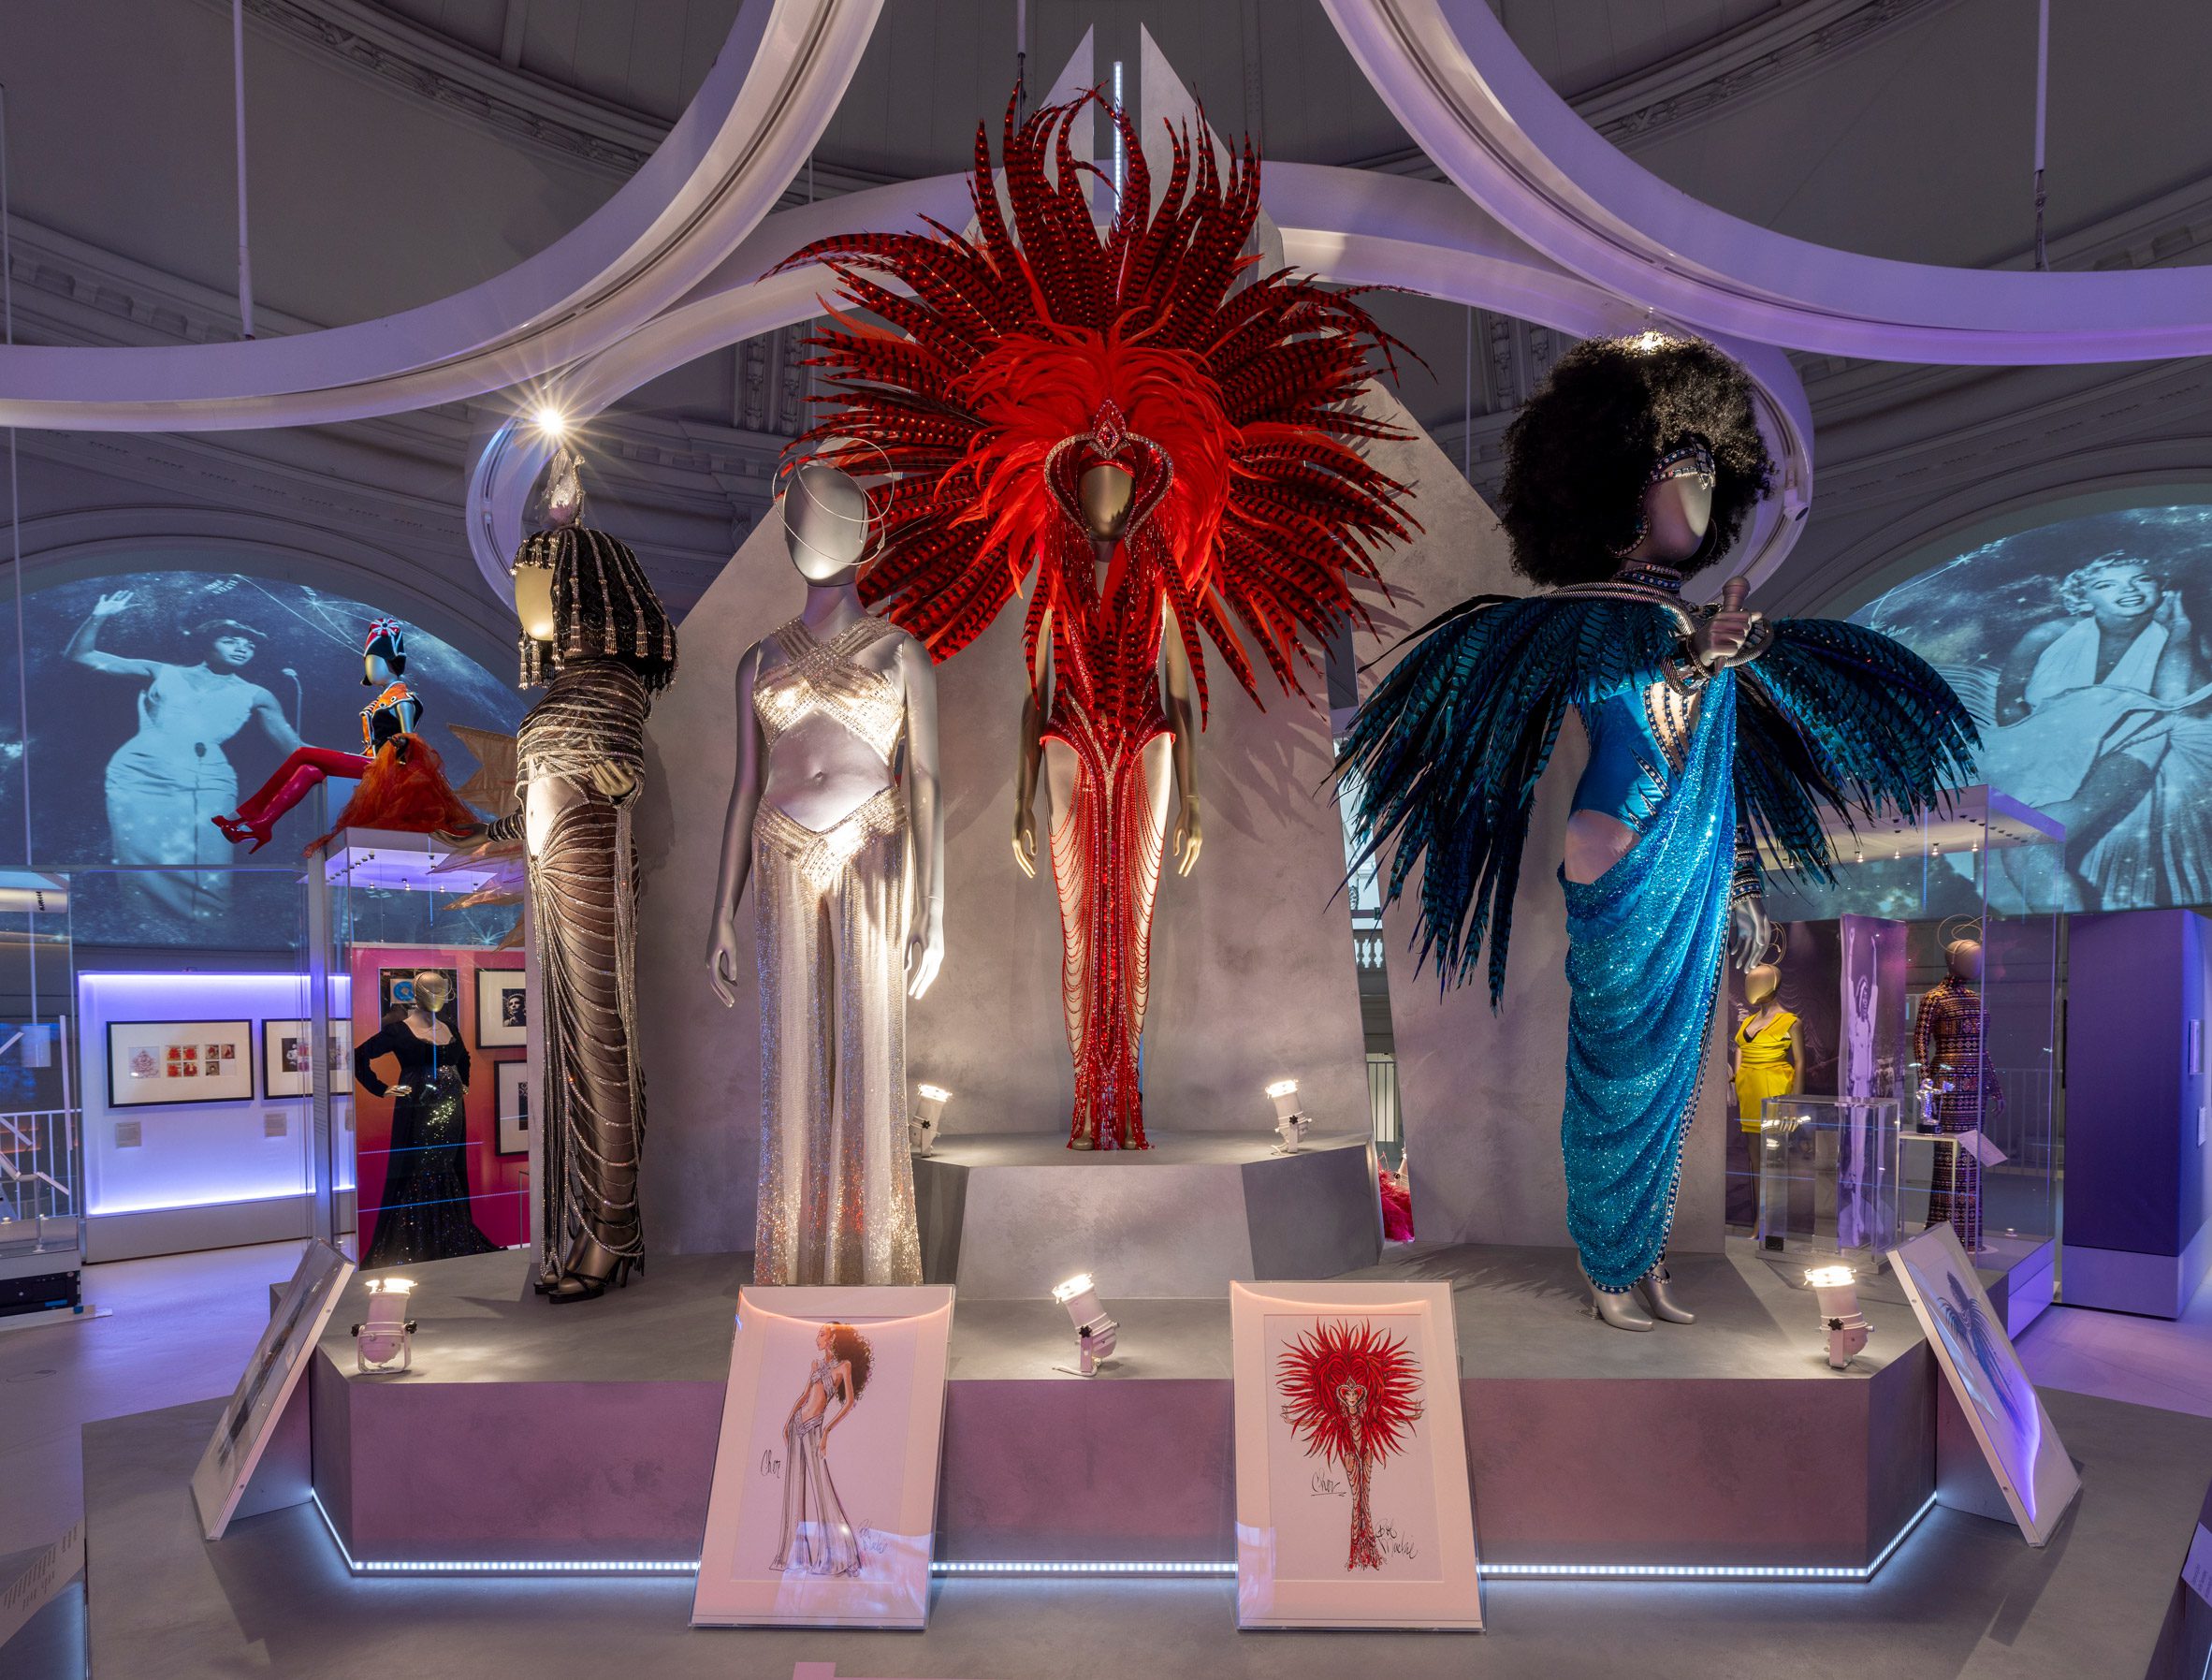 Photo of costumes on display at the Diva exhibition in the V&A